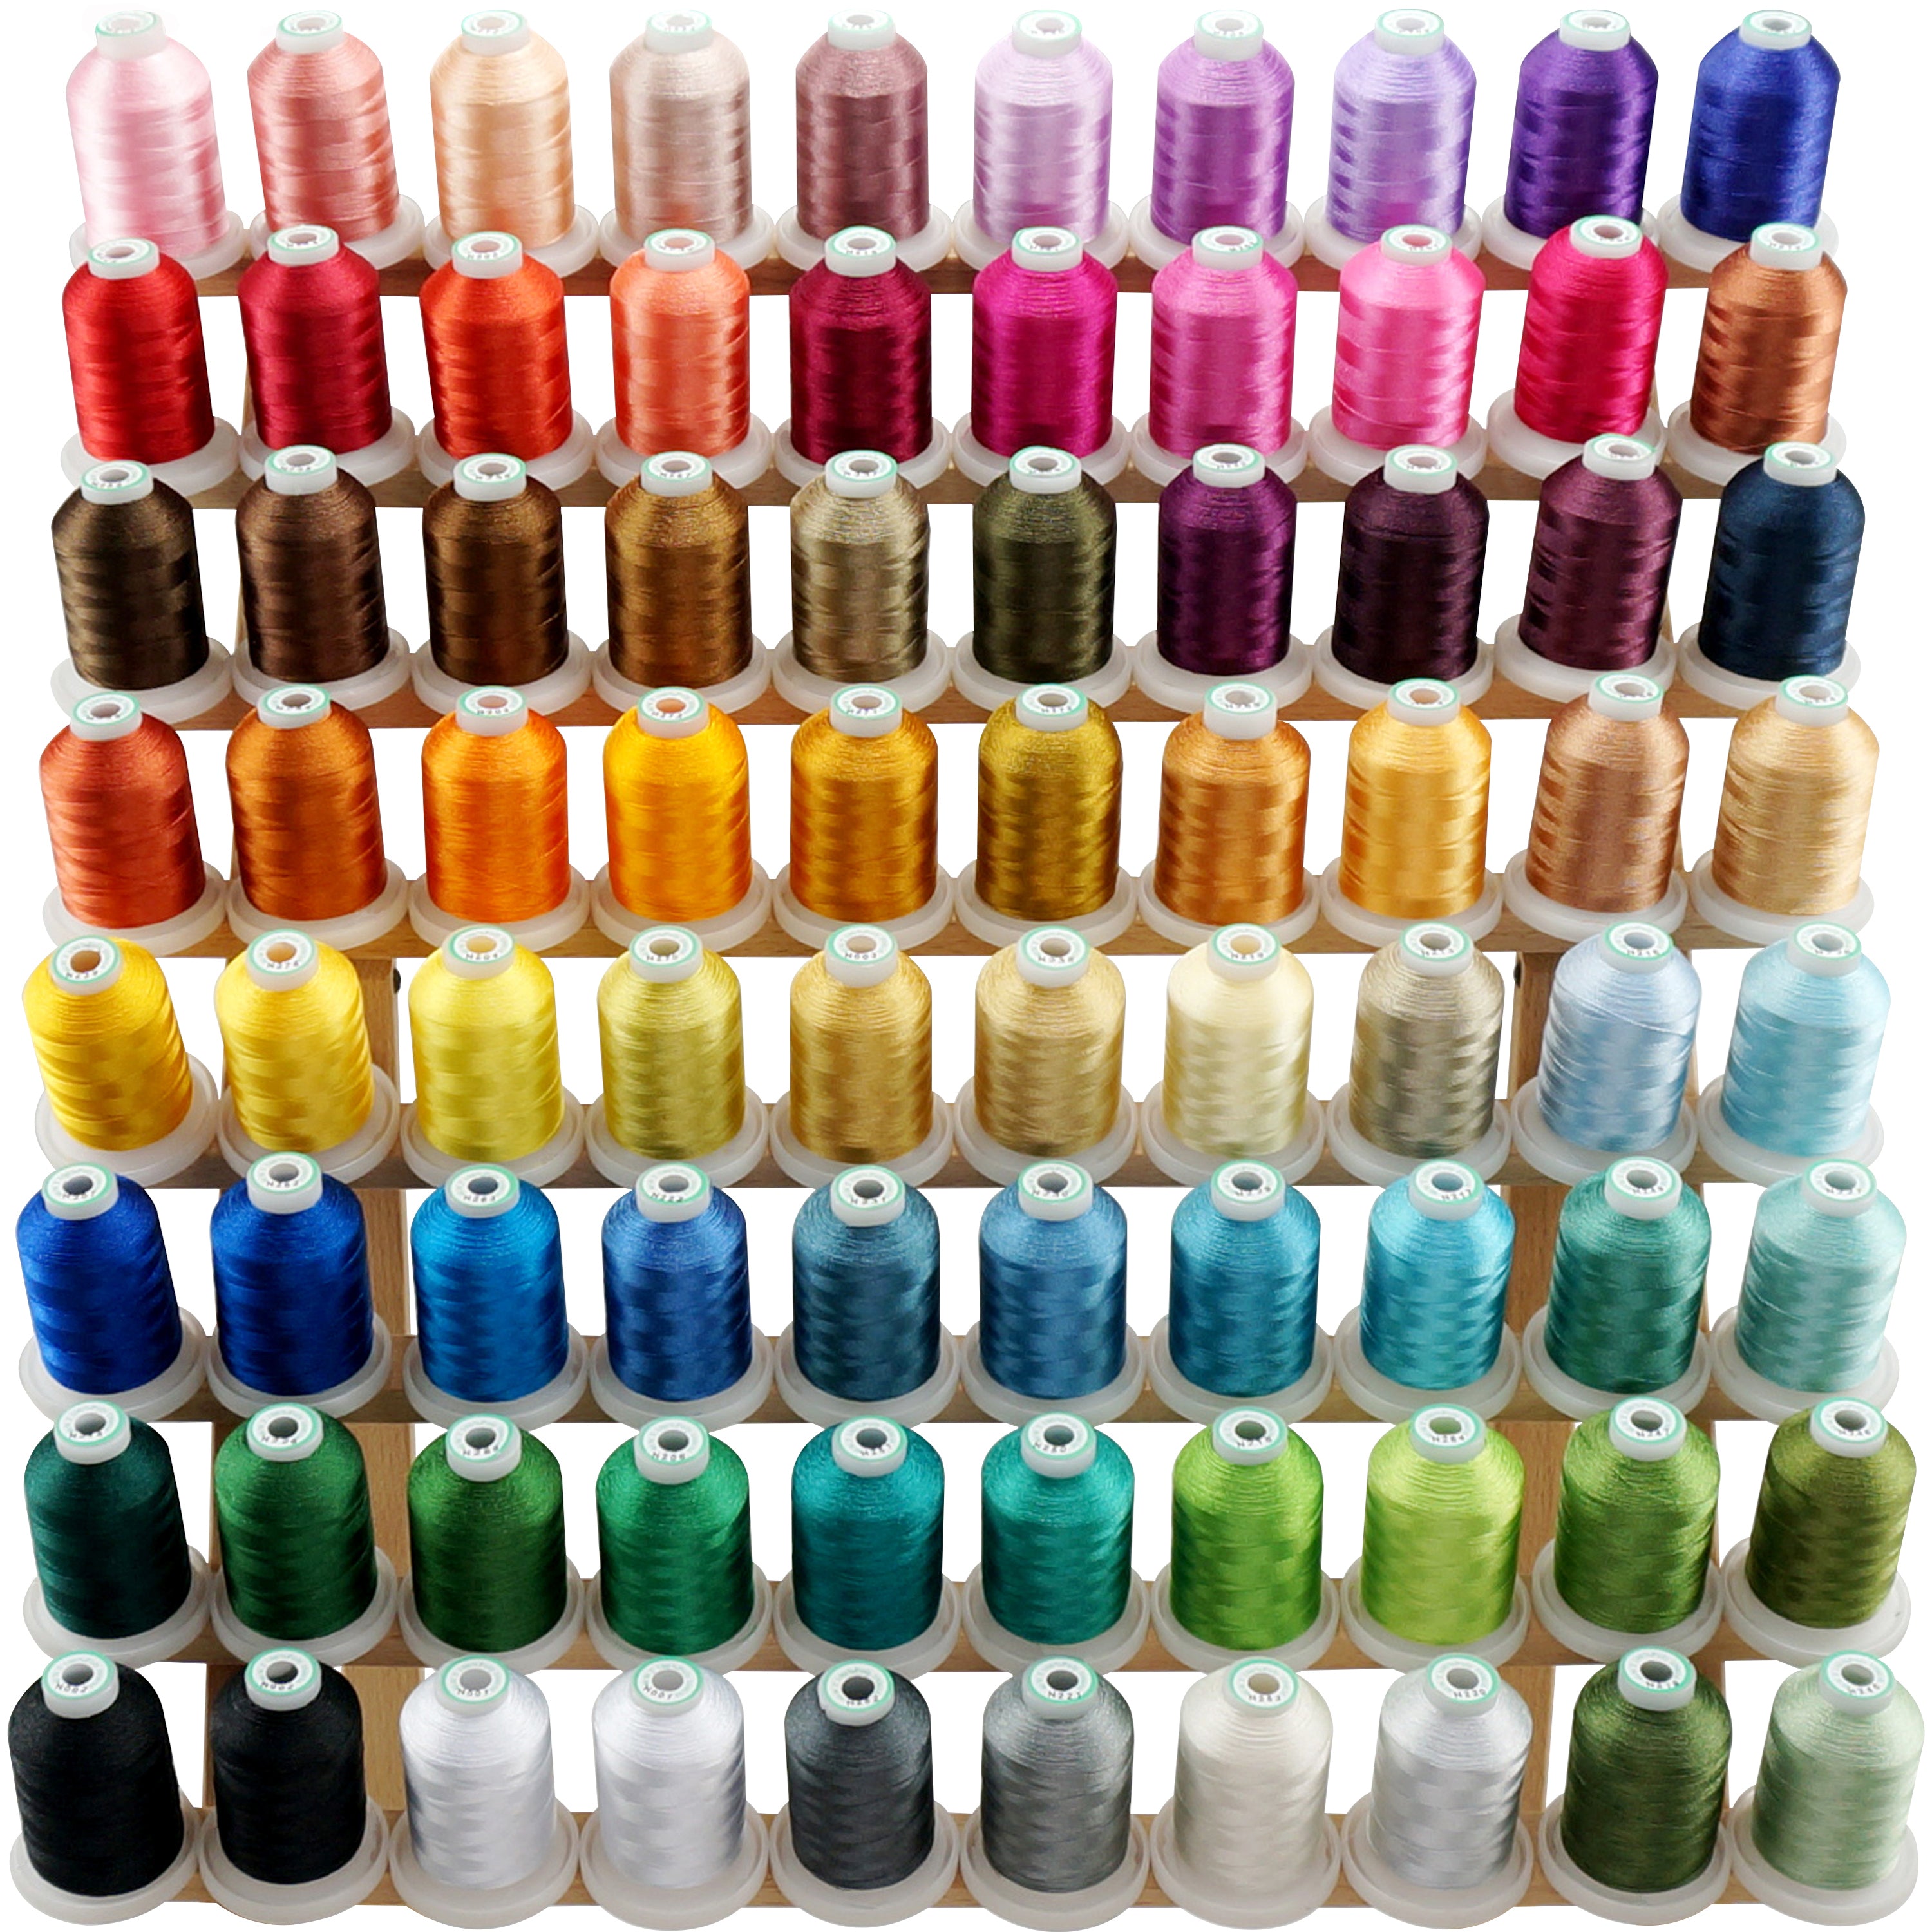 New brothread - 15 options - 8 Snap Spools of 1000M Each Polyester Machine Embroidery Thread with Clear Plastic Storage Box for Embroidery & Quilting